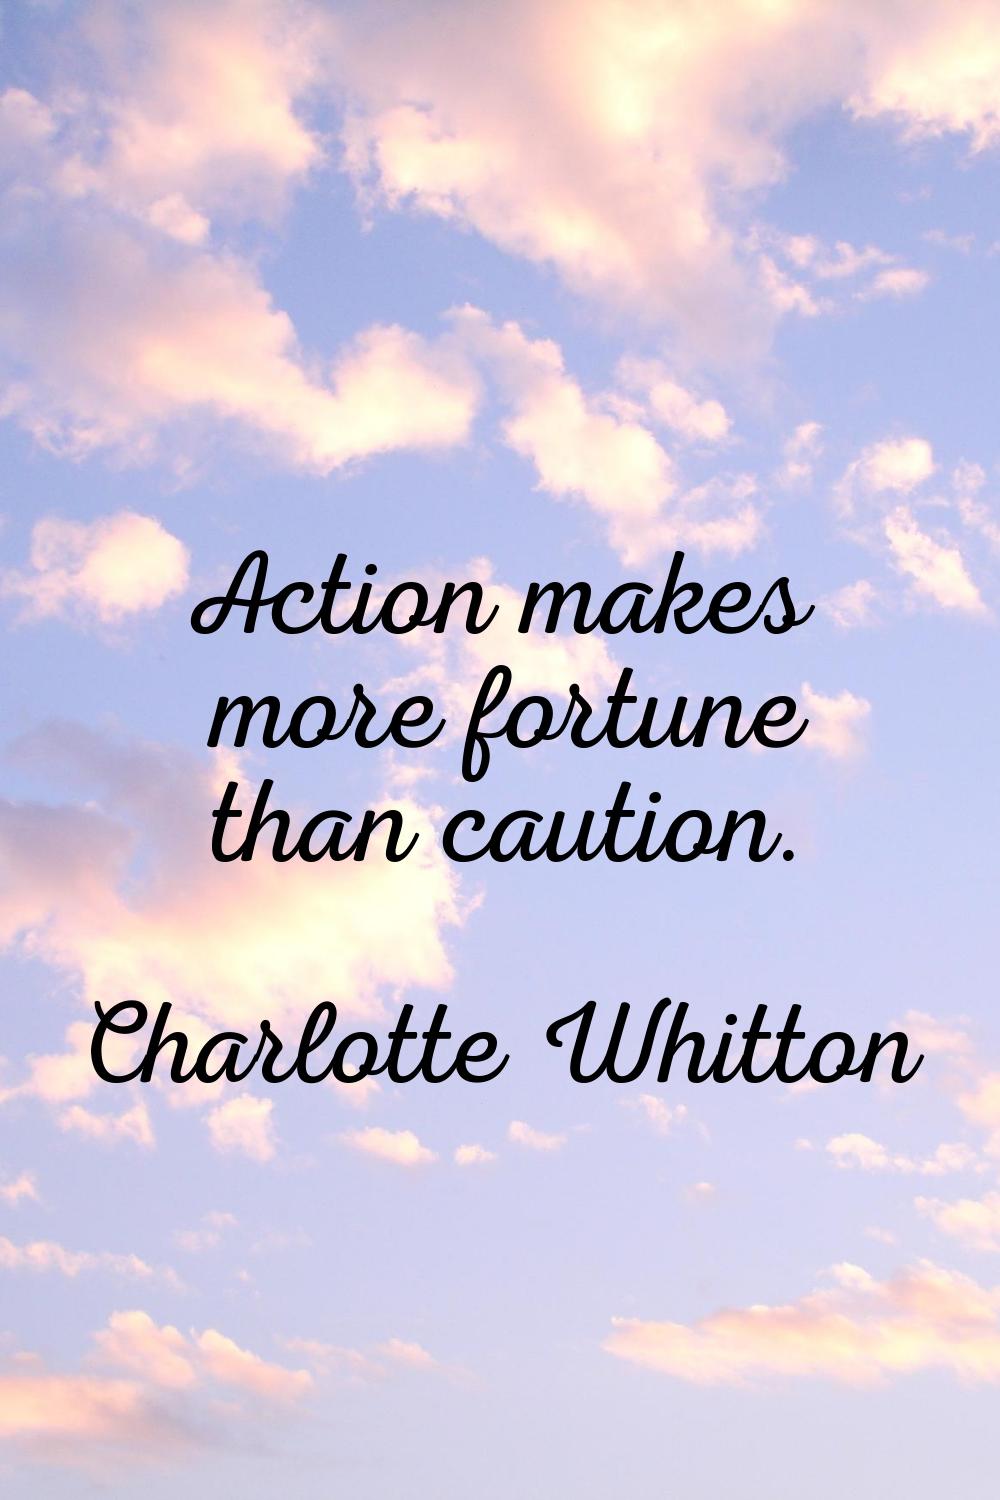 Action makes more fortune than caution.